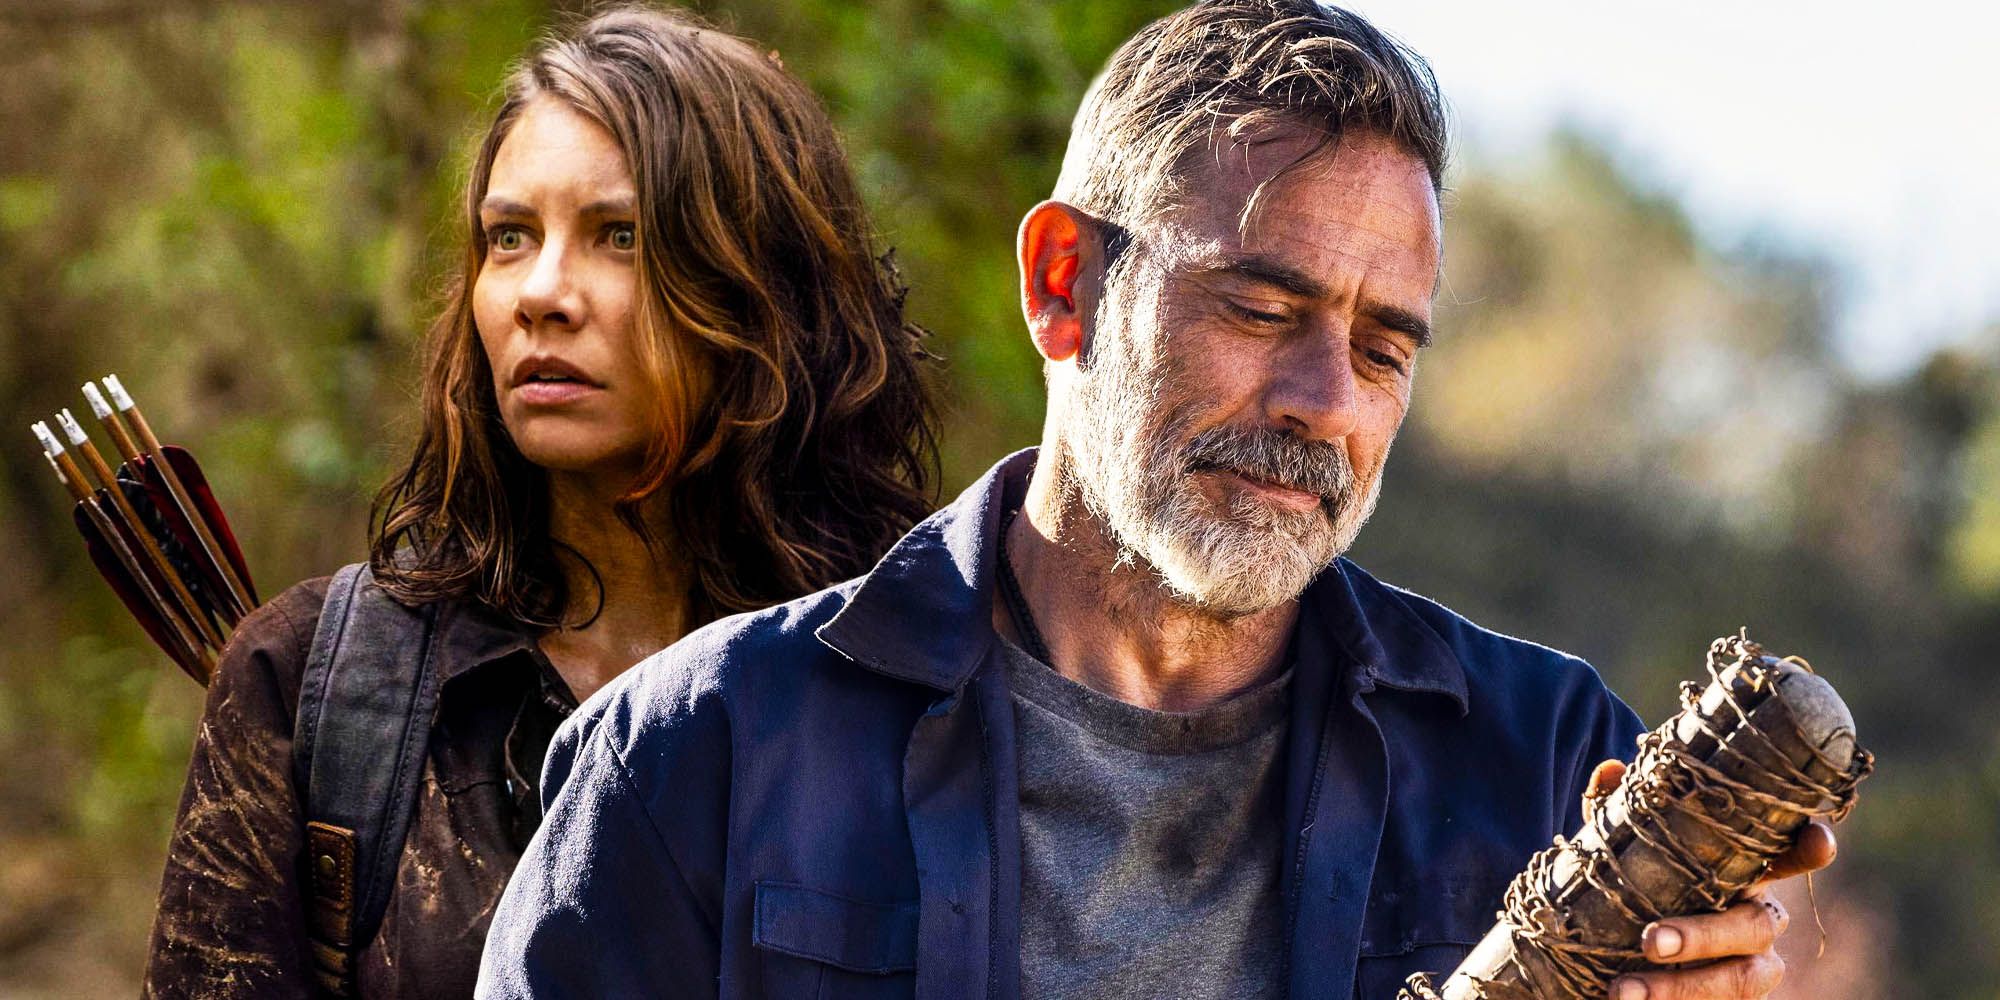 The walking dead negan and maggie romance